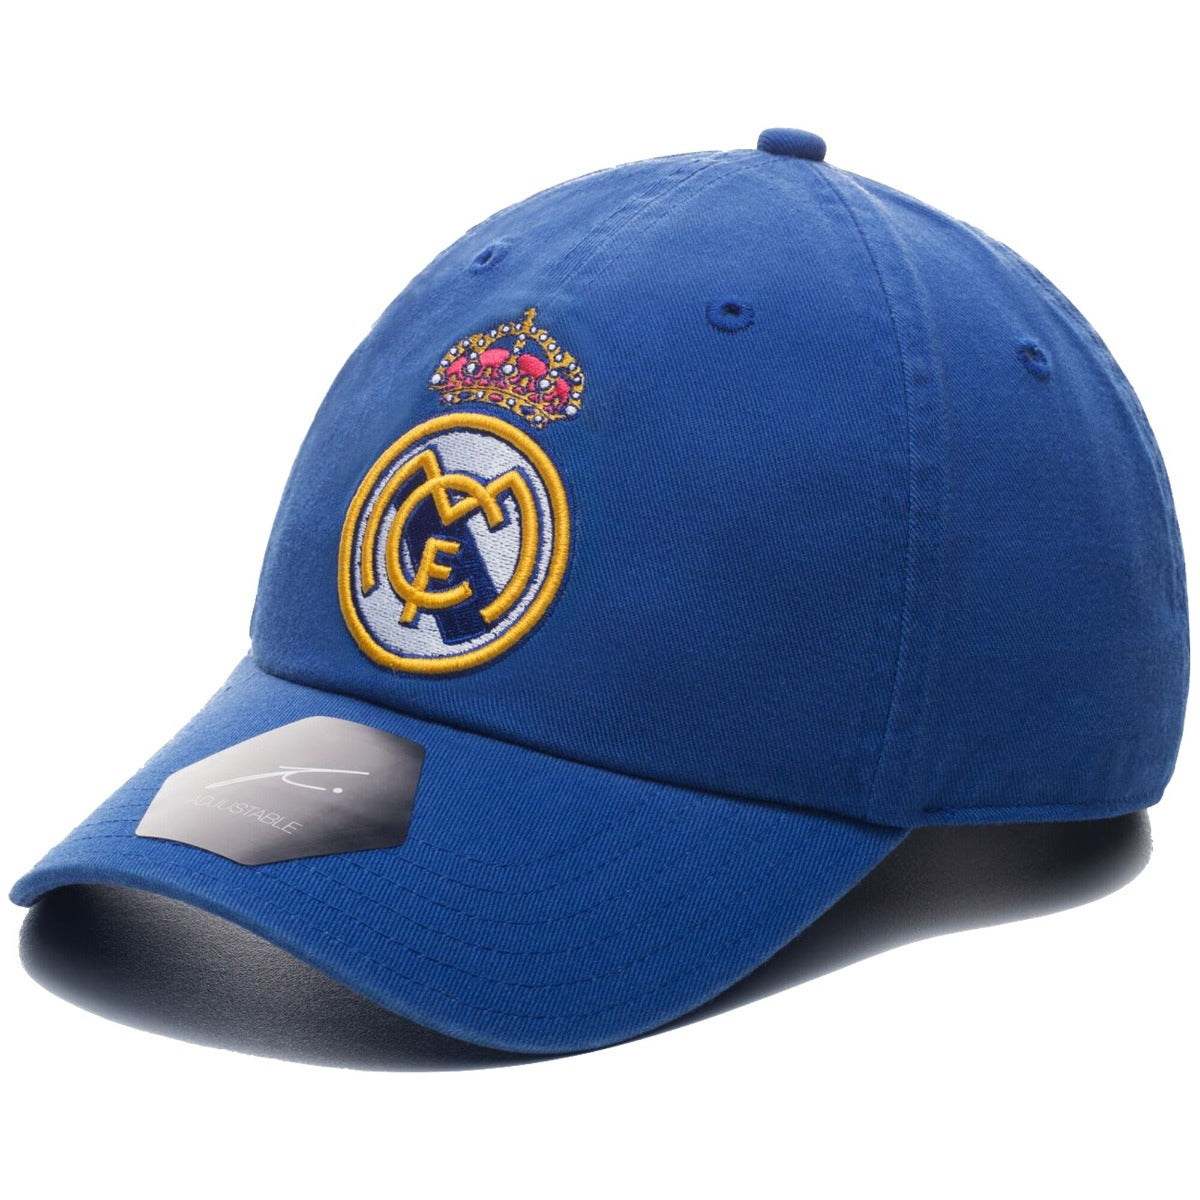 Fi Collection Real Madrid Adjustable Hat - Blue